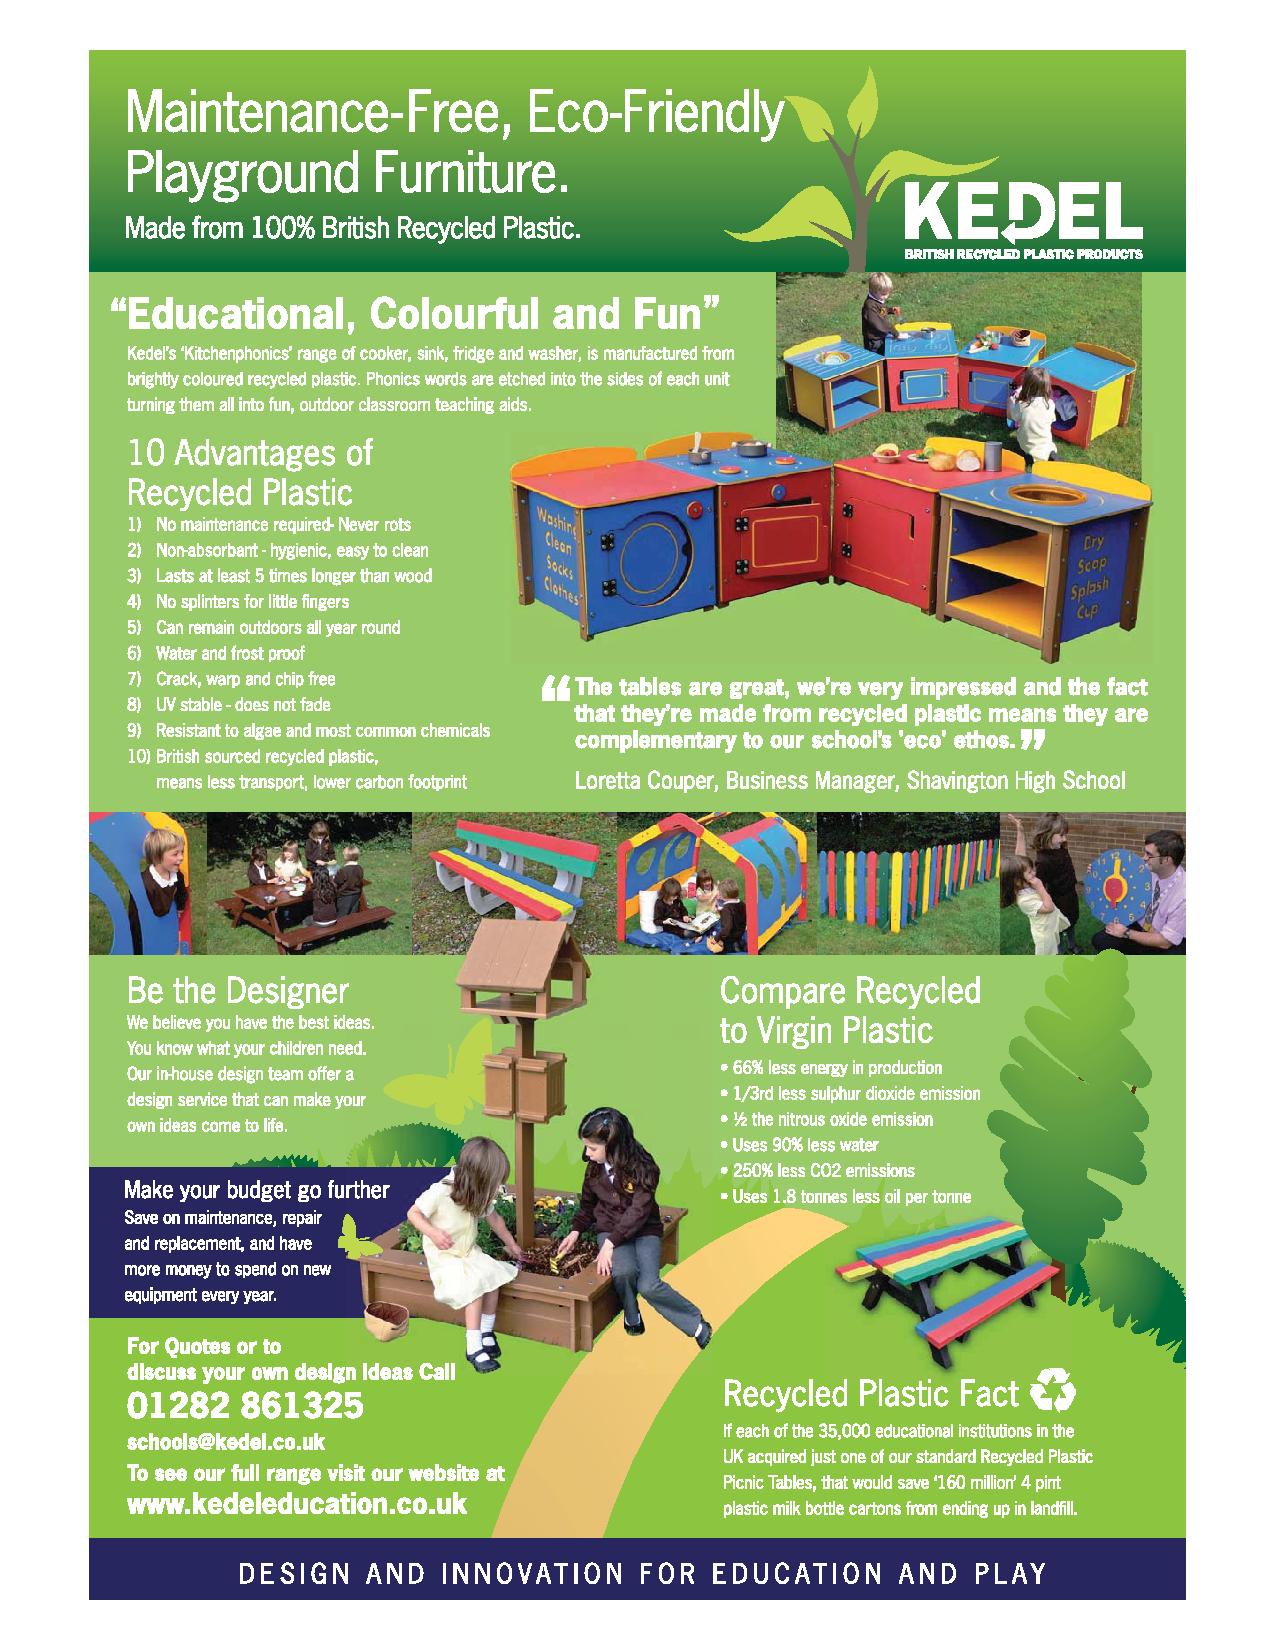 Recycled Plastic Playground Furniture Leaflet